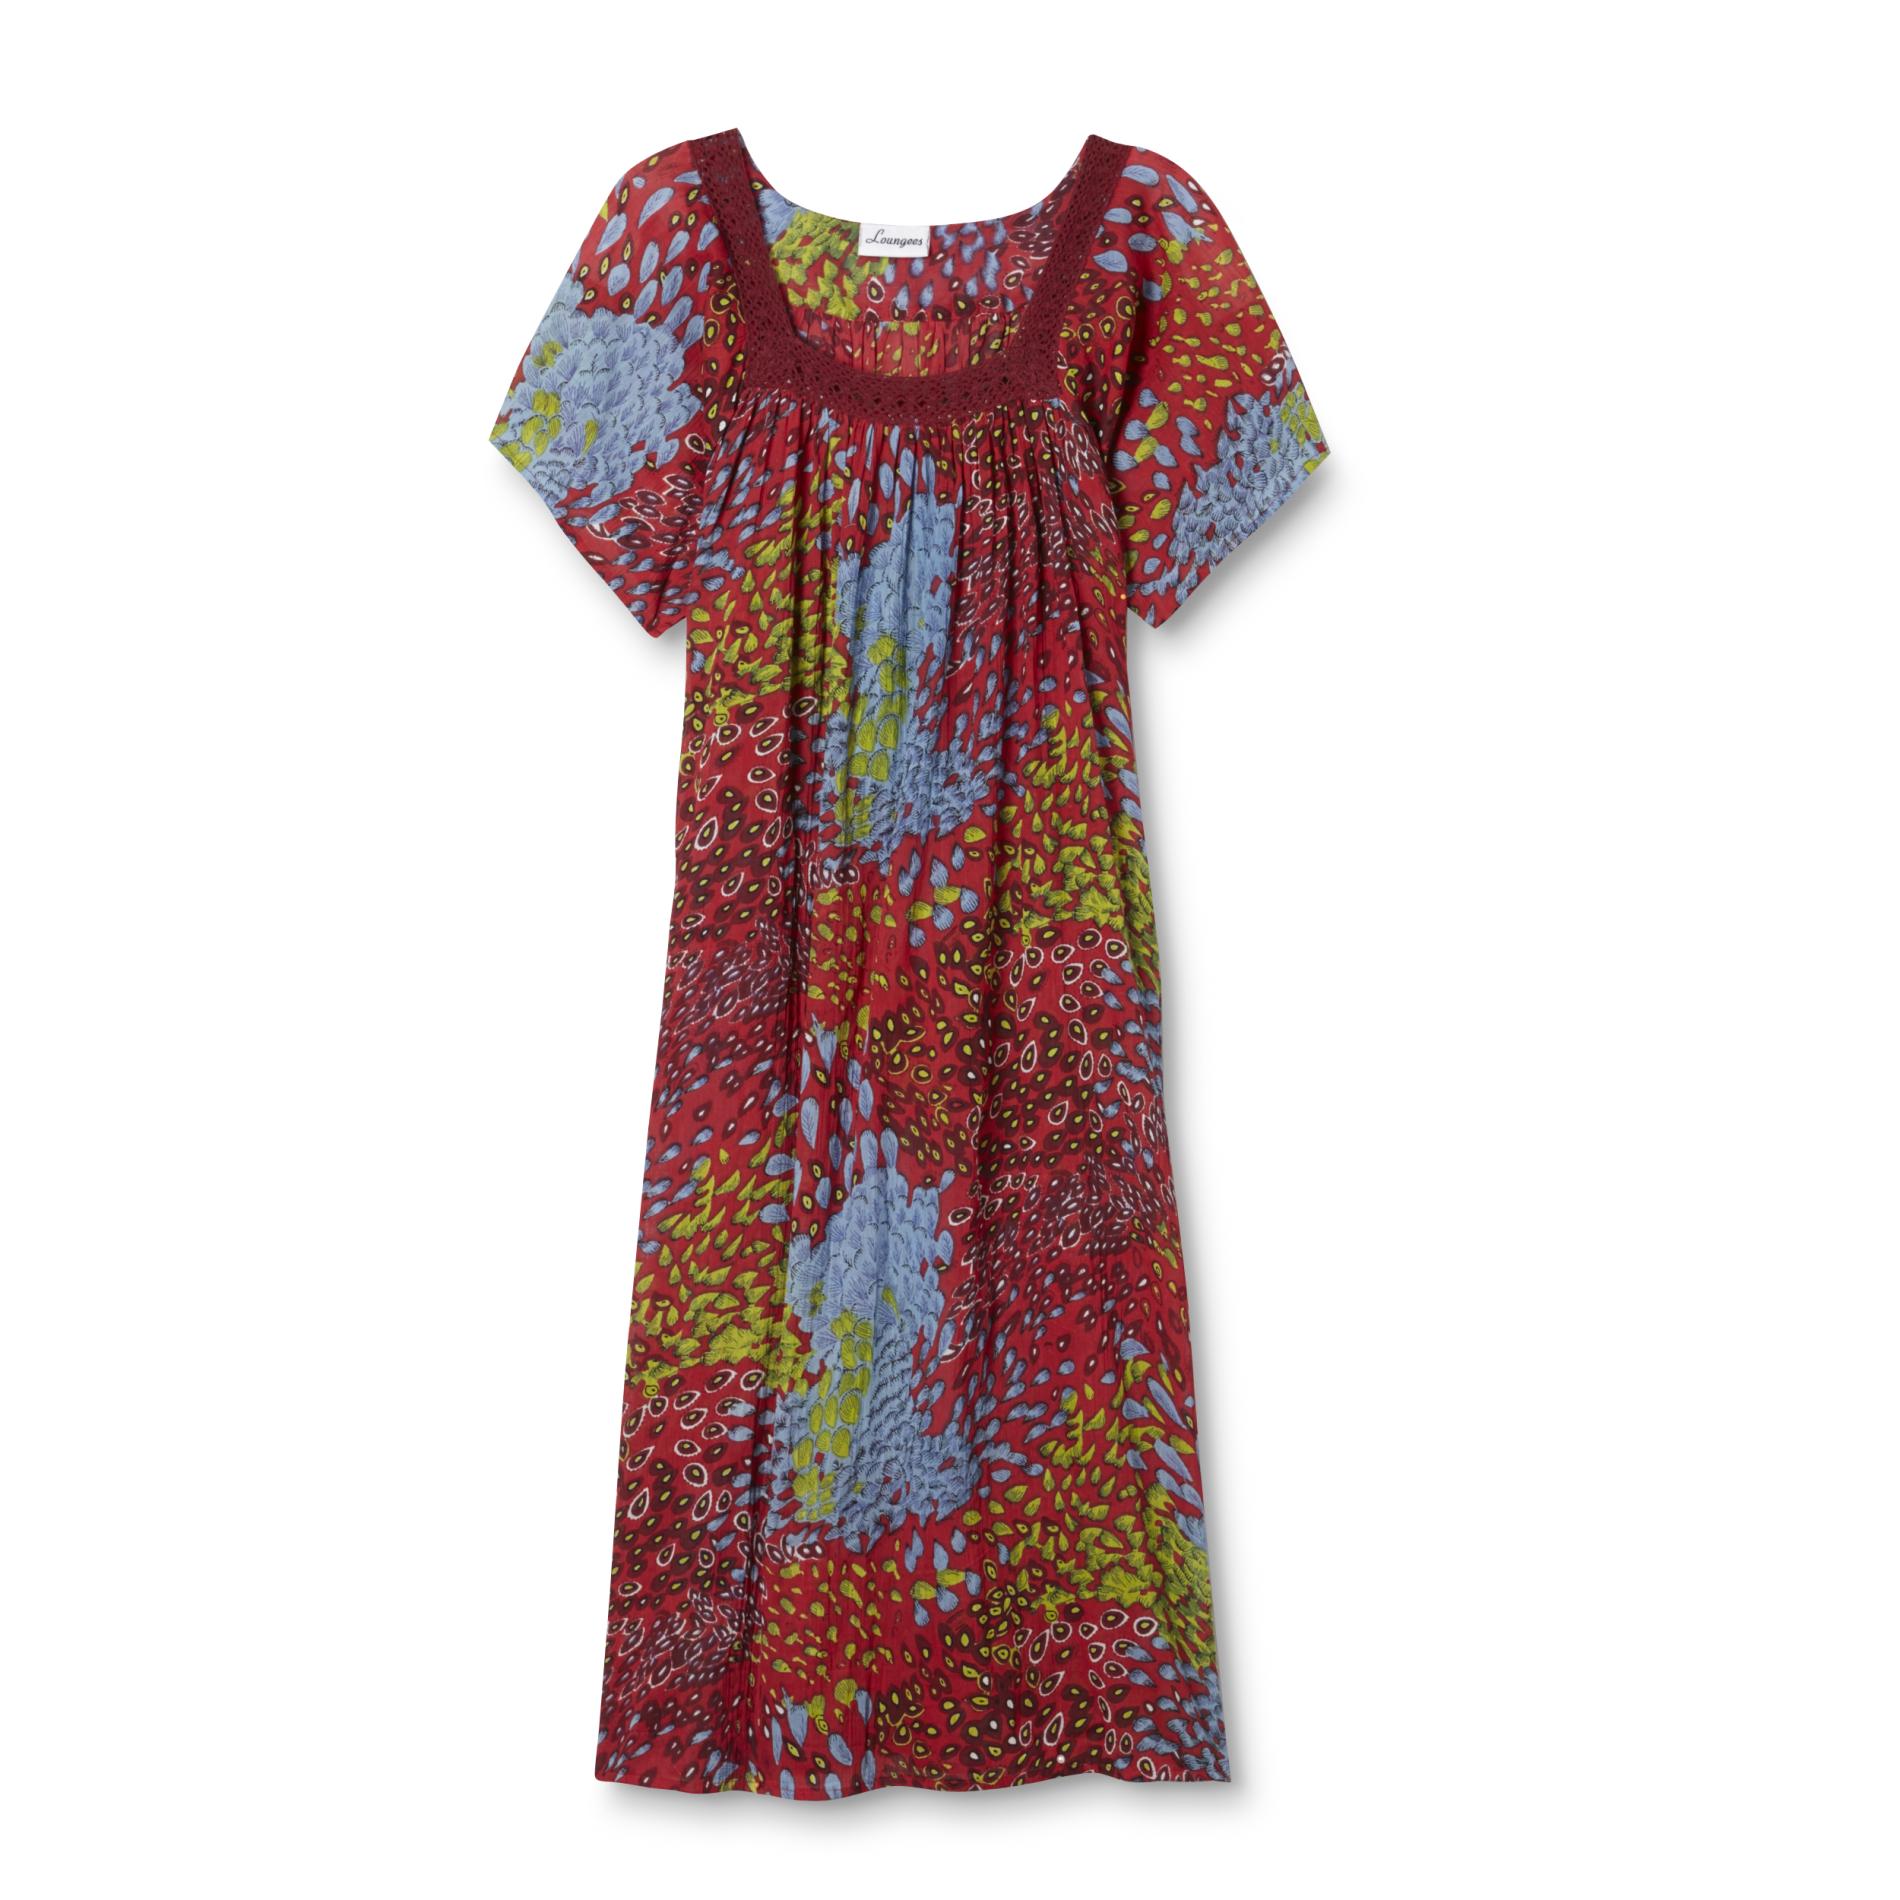 Loungees Women's Crepon Nightgown - Peacock